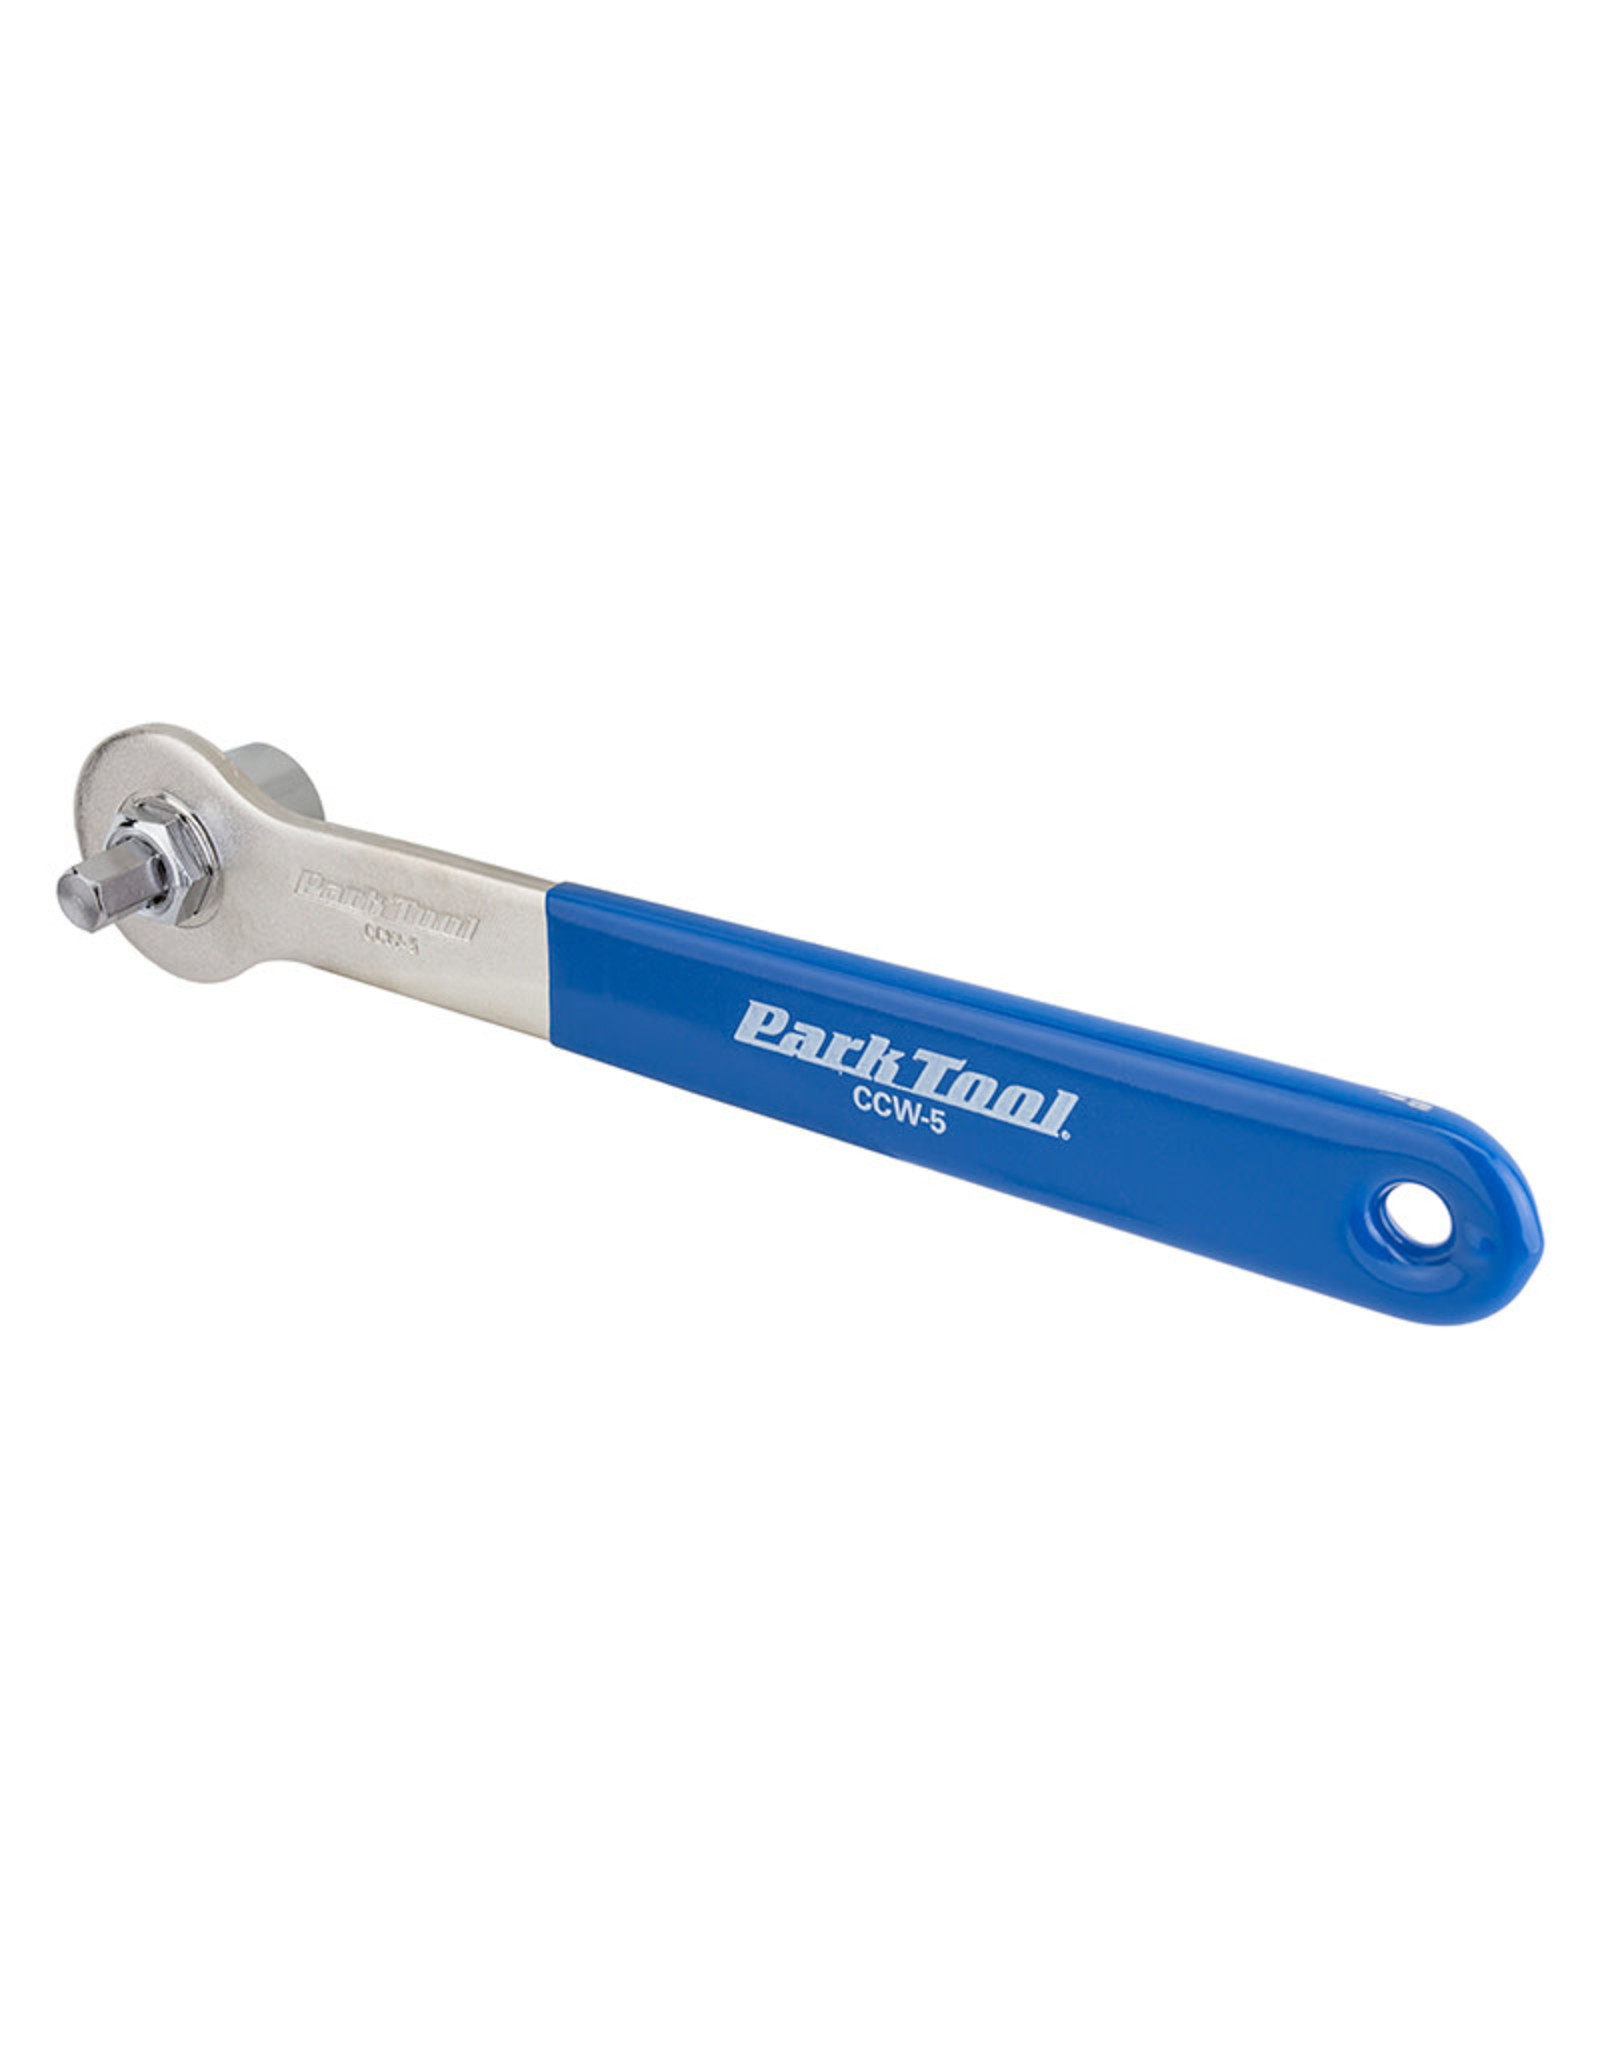 Park Tool Park Tool CCW-5 Crank Wrench 14mm & 8mm Hex